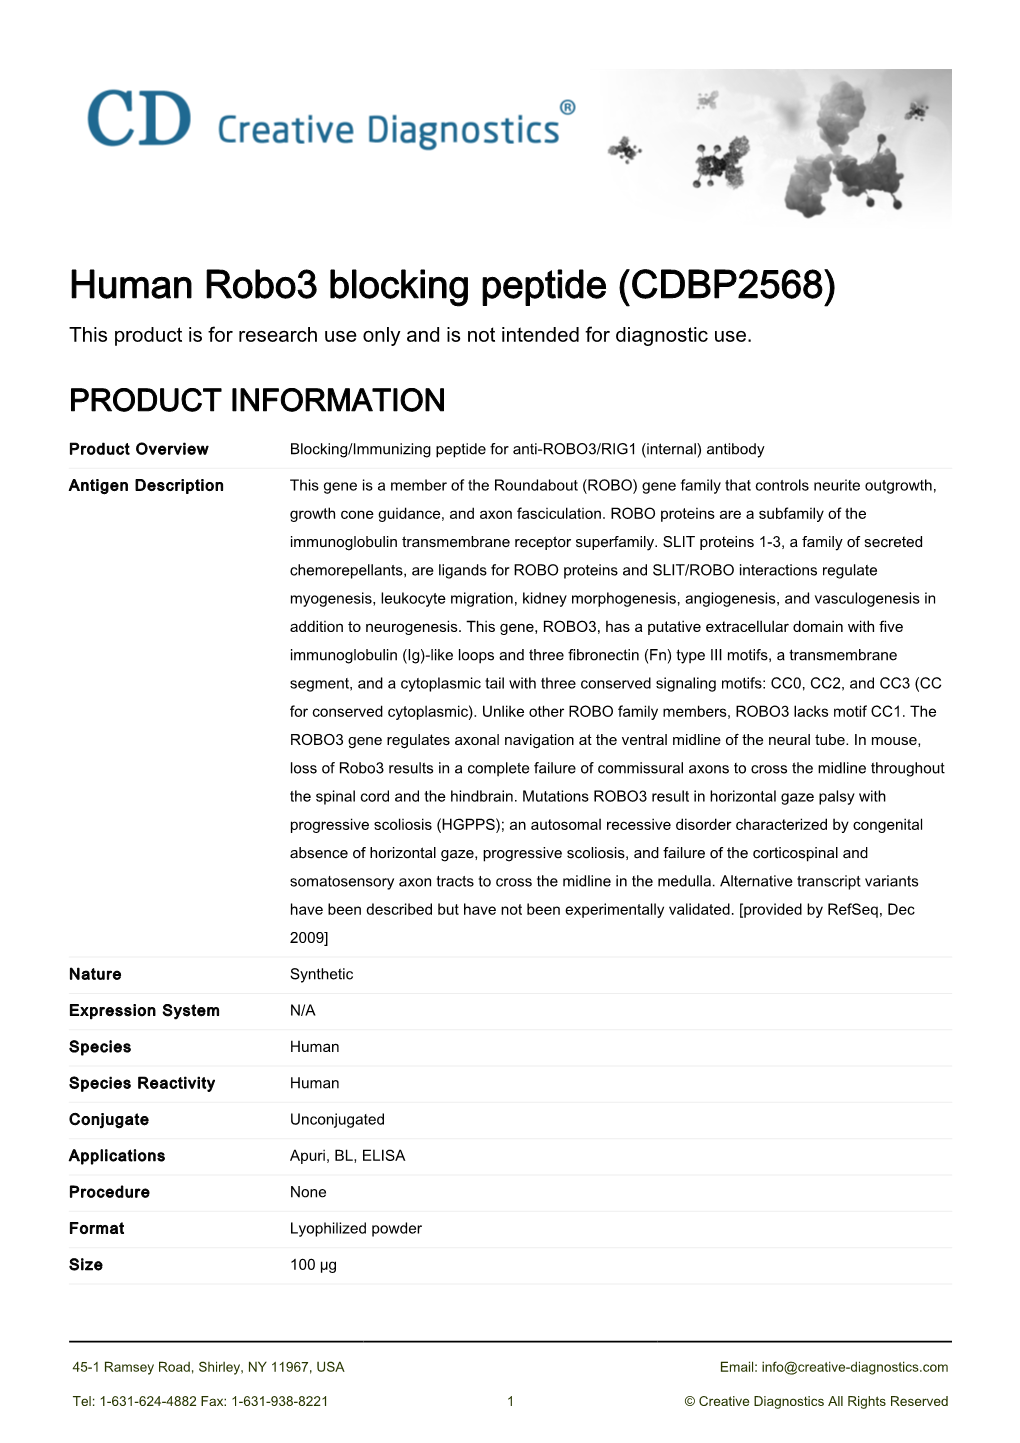 Human Robo3 Blocking Peptide (CDBP2568) This Product Is for Research Use Only and Is Not Intended for Diagnostic Use